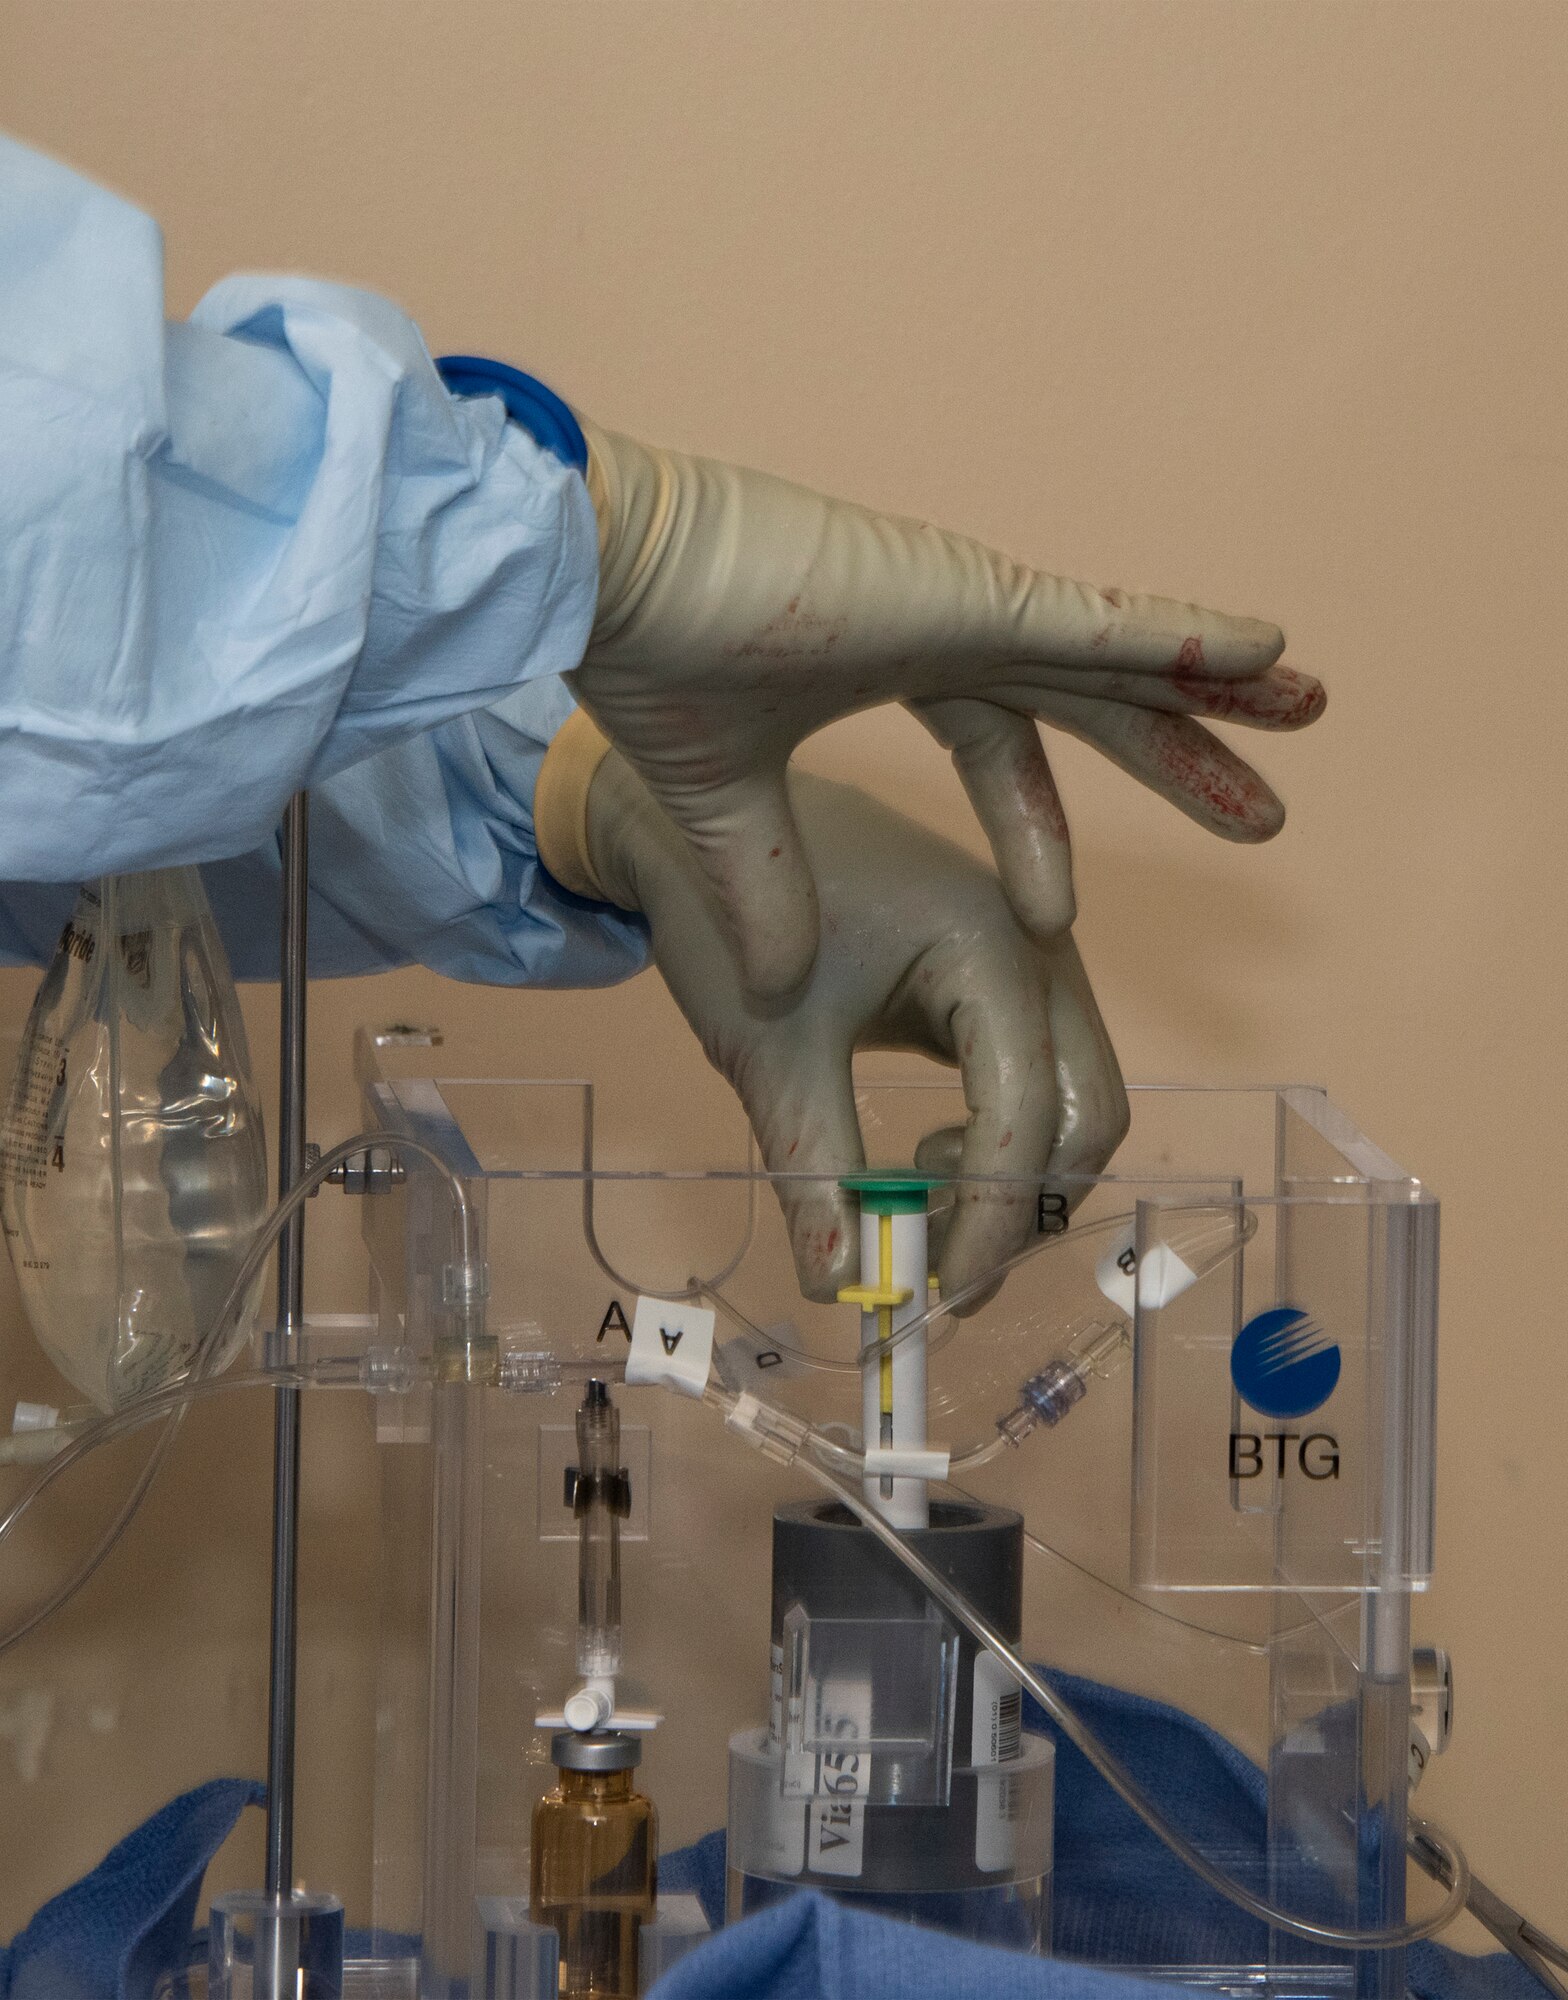 U.S. Air Force doctors prepare a high dose of Yttrium-90 radioactive beads during a procedure at David Grant U.S. Air Force Medical center, Sept. 7, 2018, Travis Air Force Base, Calif. The Y-90 radio-embolization is an advanced and minimally invasive method utilized to treat cancer by delivering millions of tiny radioactive beads inside the blood vessels that feed a tumor. The high dose of targeted radiation prospectively kills the tumor while sparing normal tissue. This was the first time the treatment was performed at DGMC. (U.S. Air Force photo by Heide Couch)